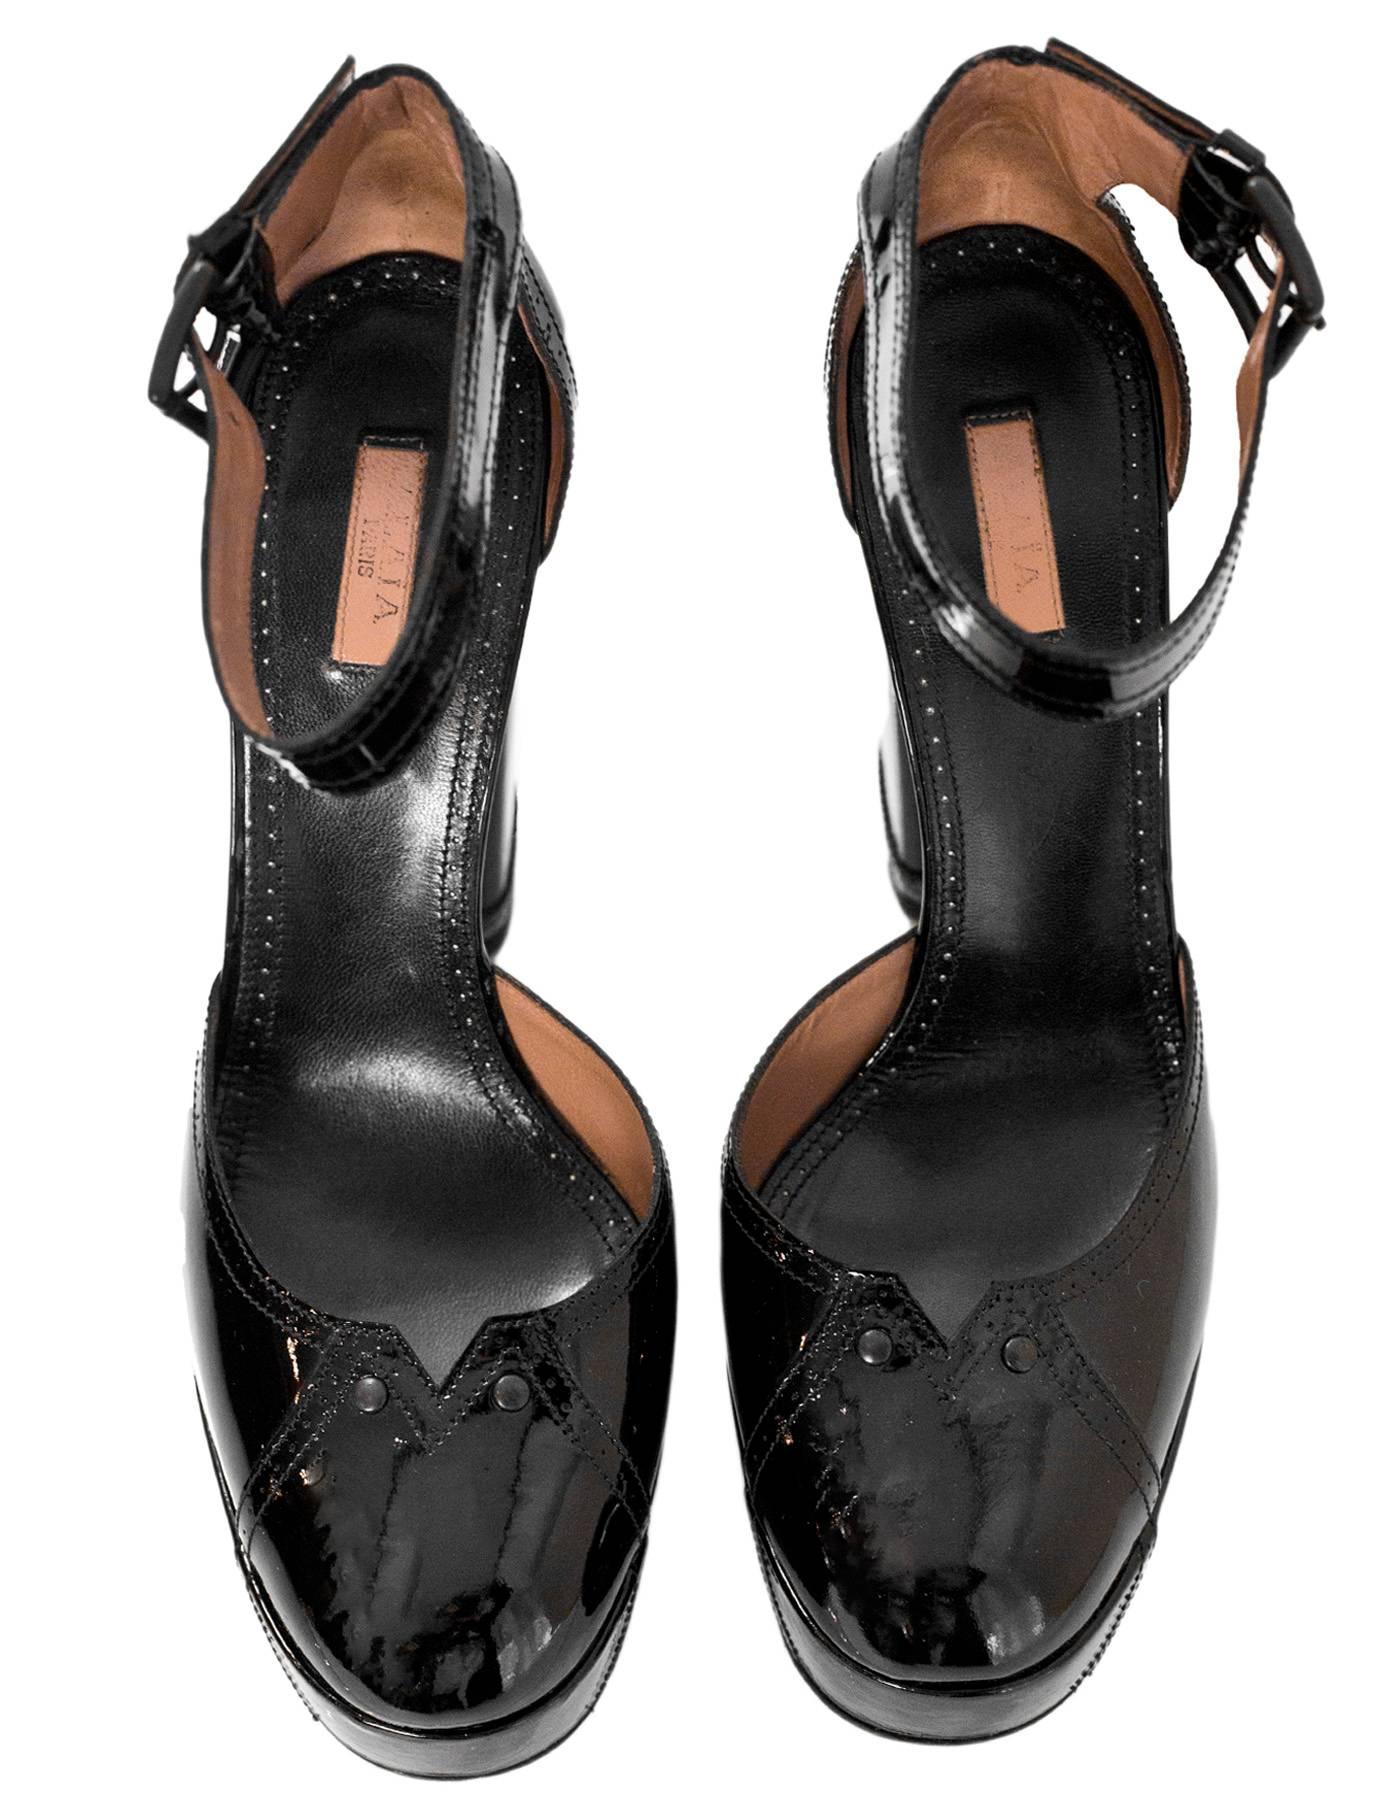 Alaia Black Patent Pumps With Grommet Detail Sz 37.5 In Excellent Condition In New York, NY